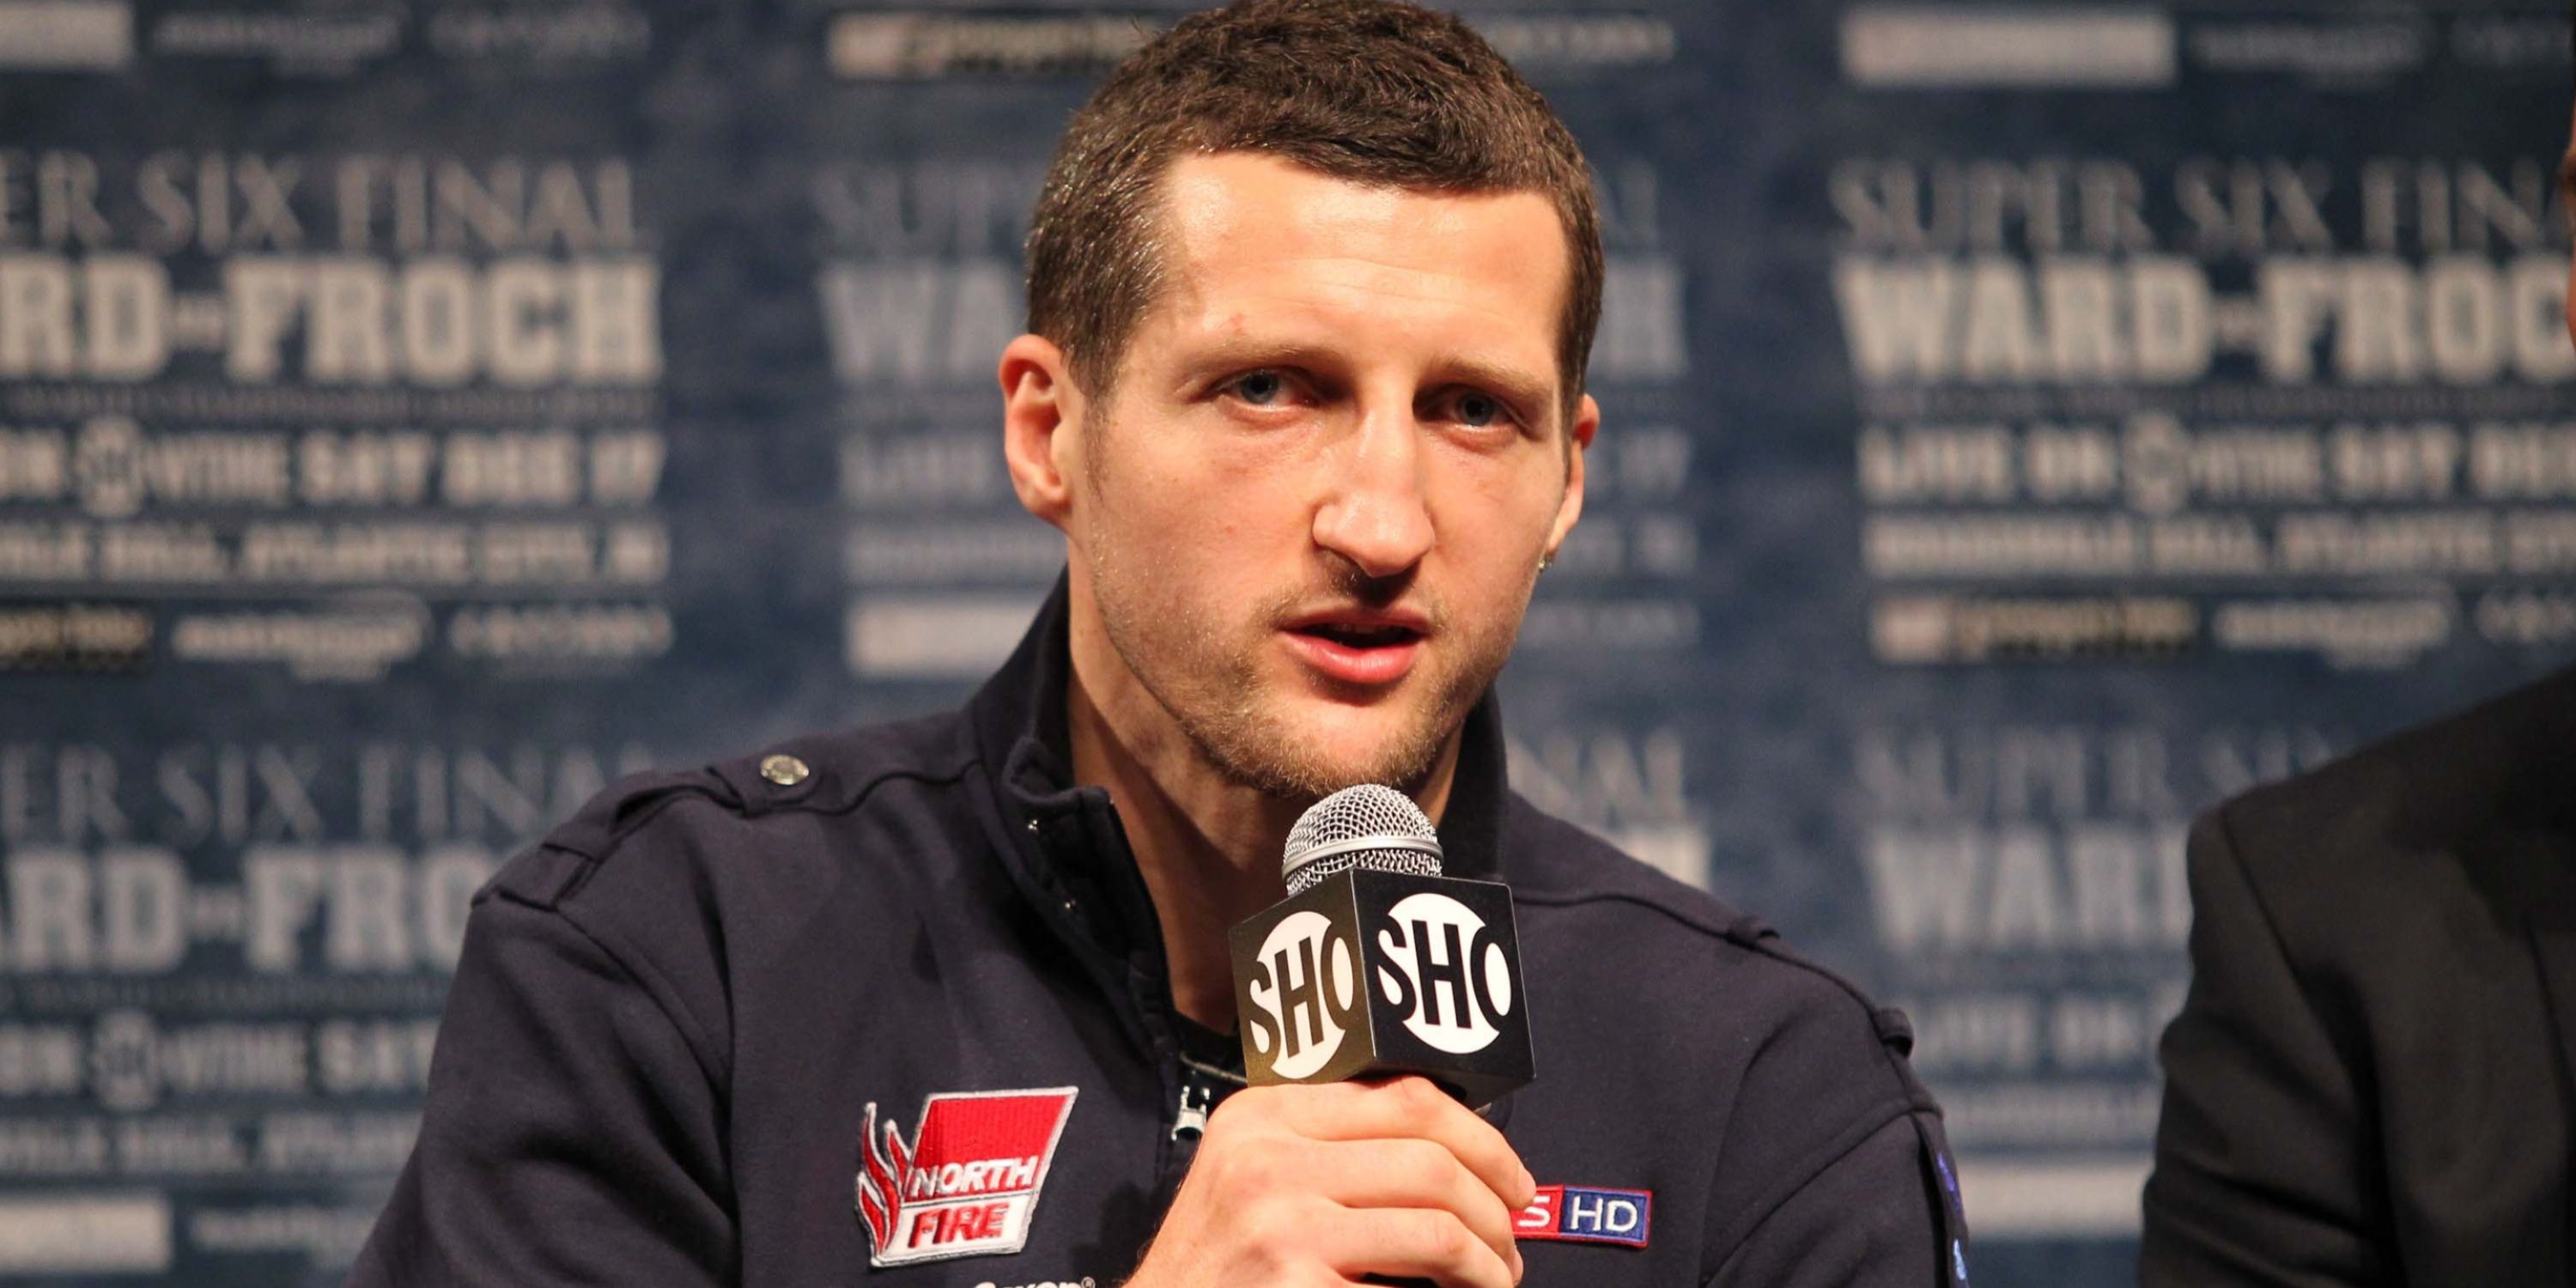 Carl Froch at a press conference